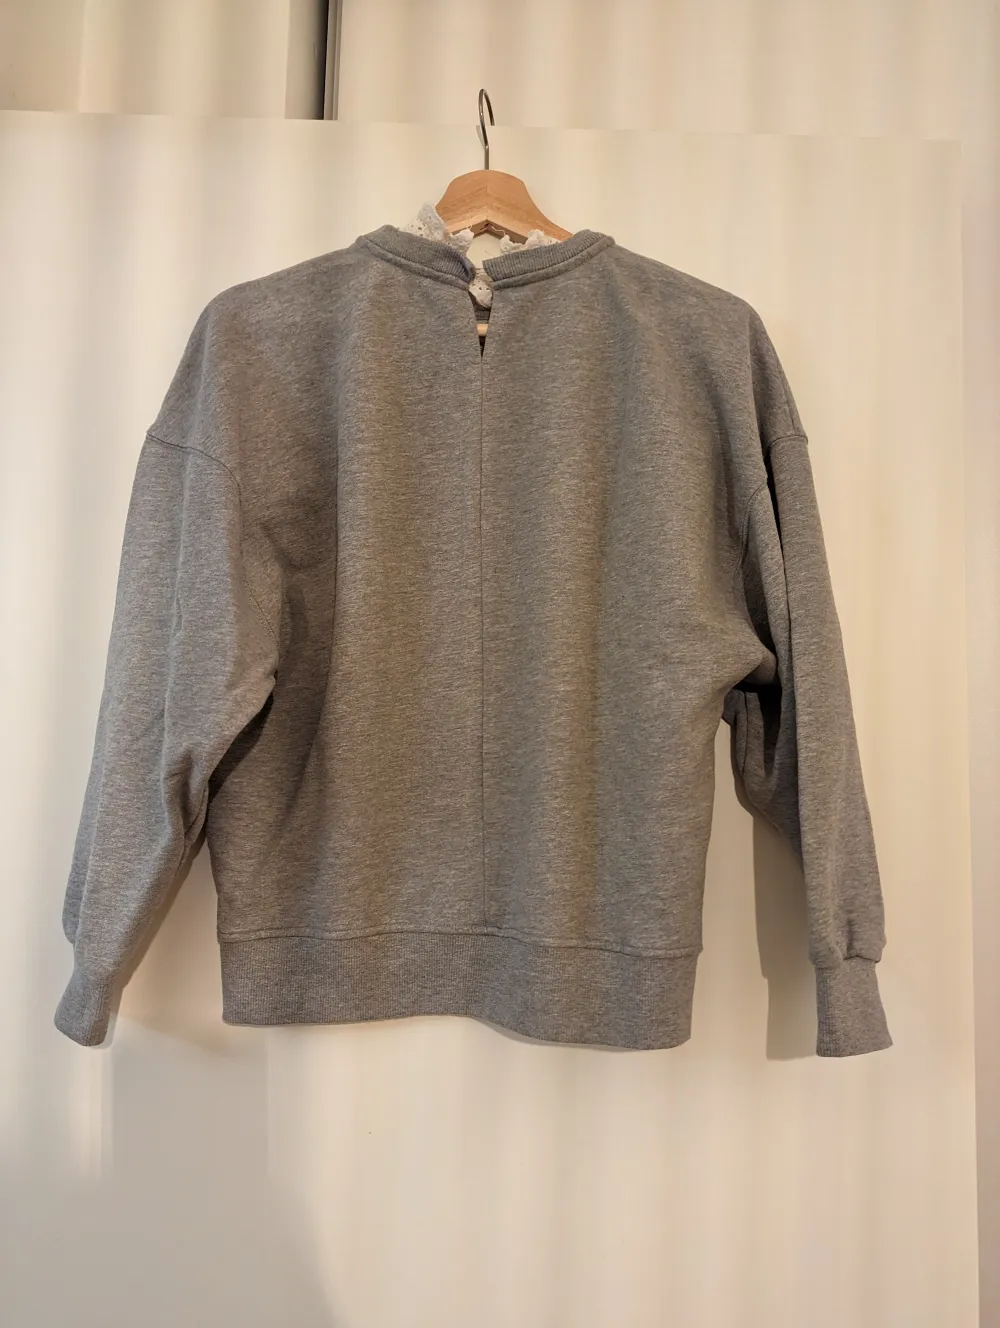 Gray Mango sweatshirt. Used twice. Hopefully will find a new owner that will use it more.. Hoodies.